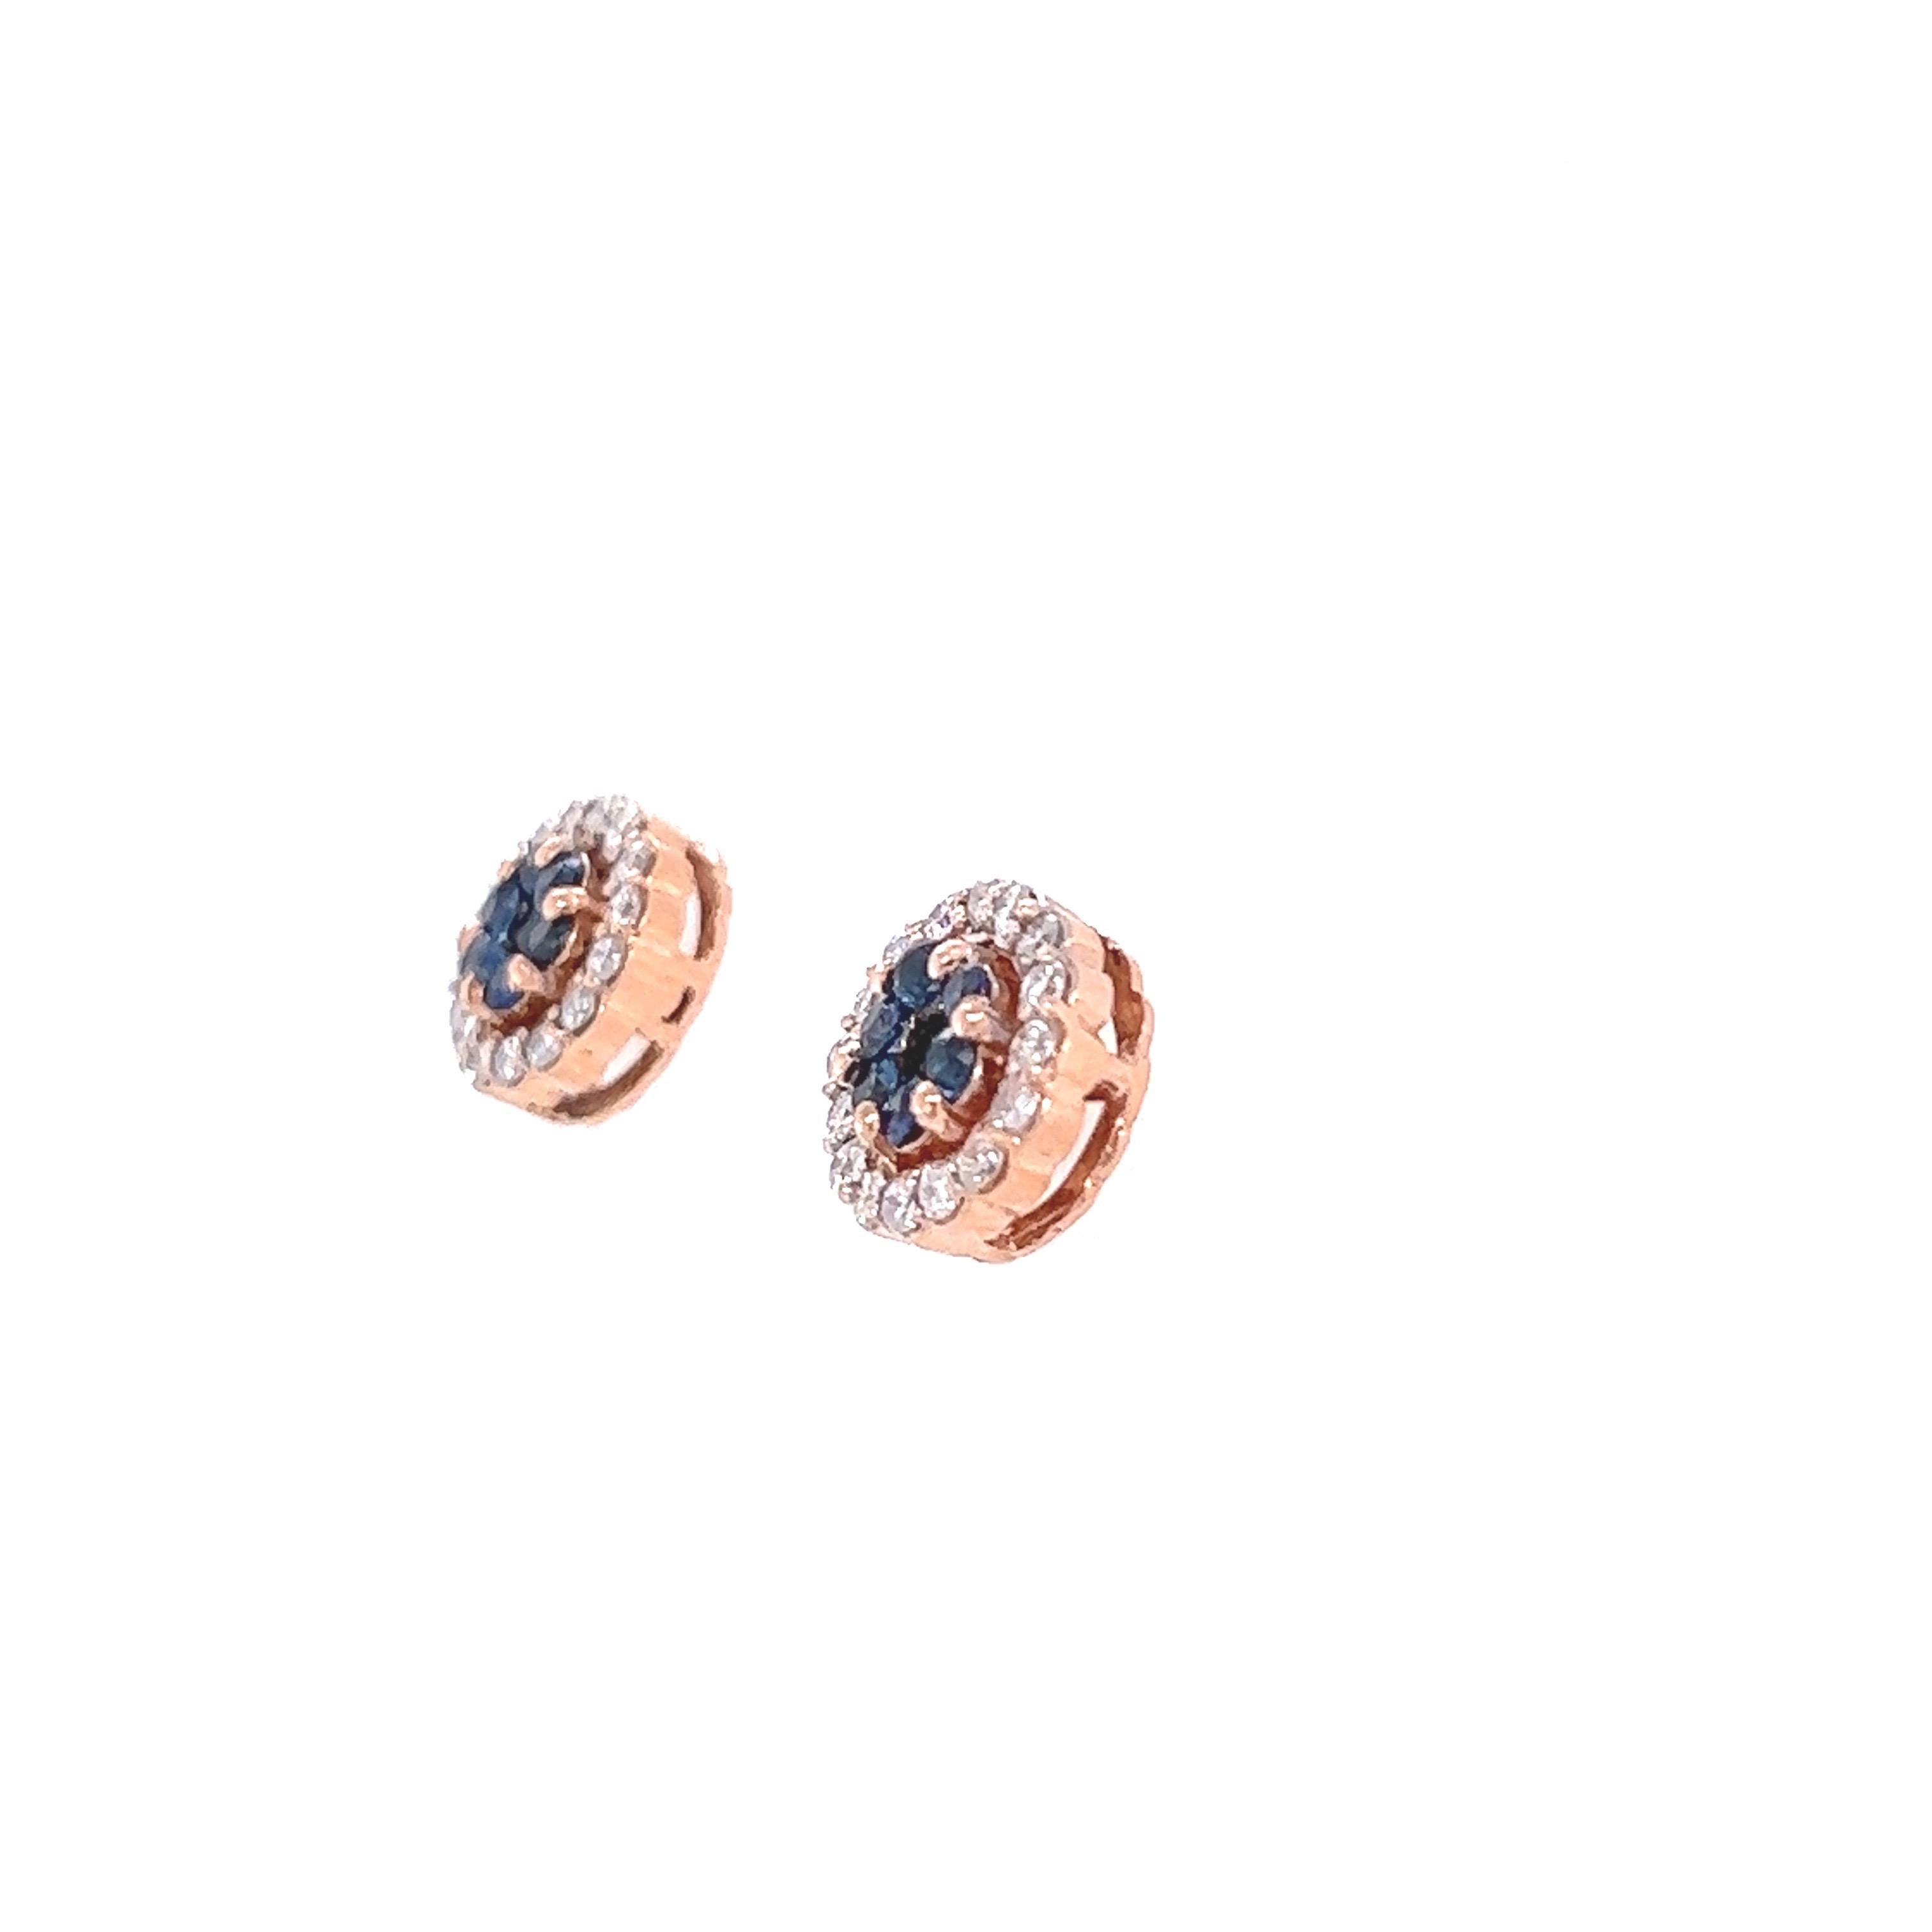 These earrings have 14 Natural Round Cut Sapphires that weigh 0.65 carats and have 32 Round Cut Diamonds that weigh 0.54 Carats. The total carat weight of the earrings are 1.19 carats. 
The diamonds have a clarity and color of SI-F
They are set in